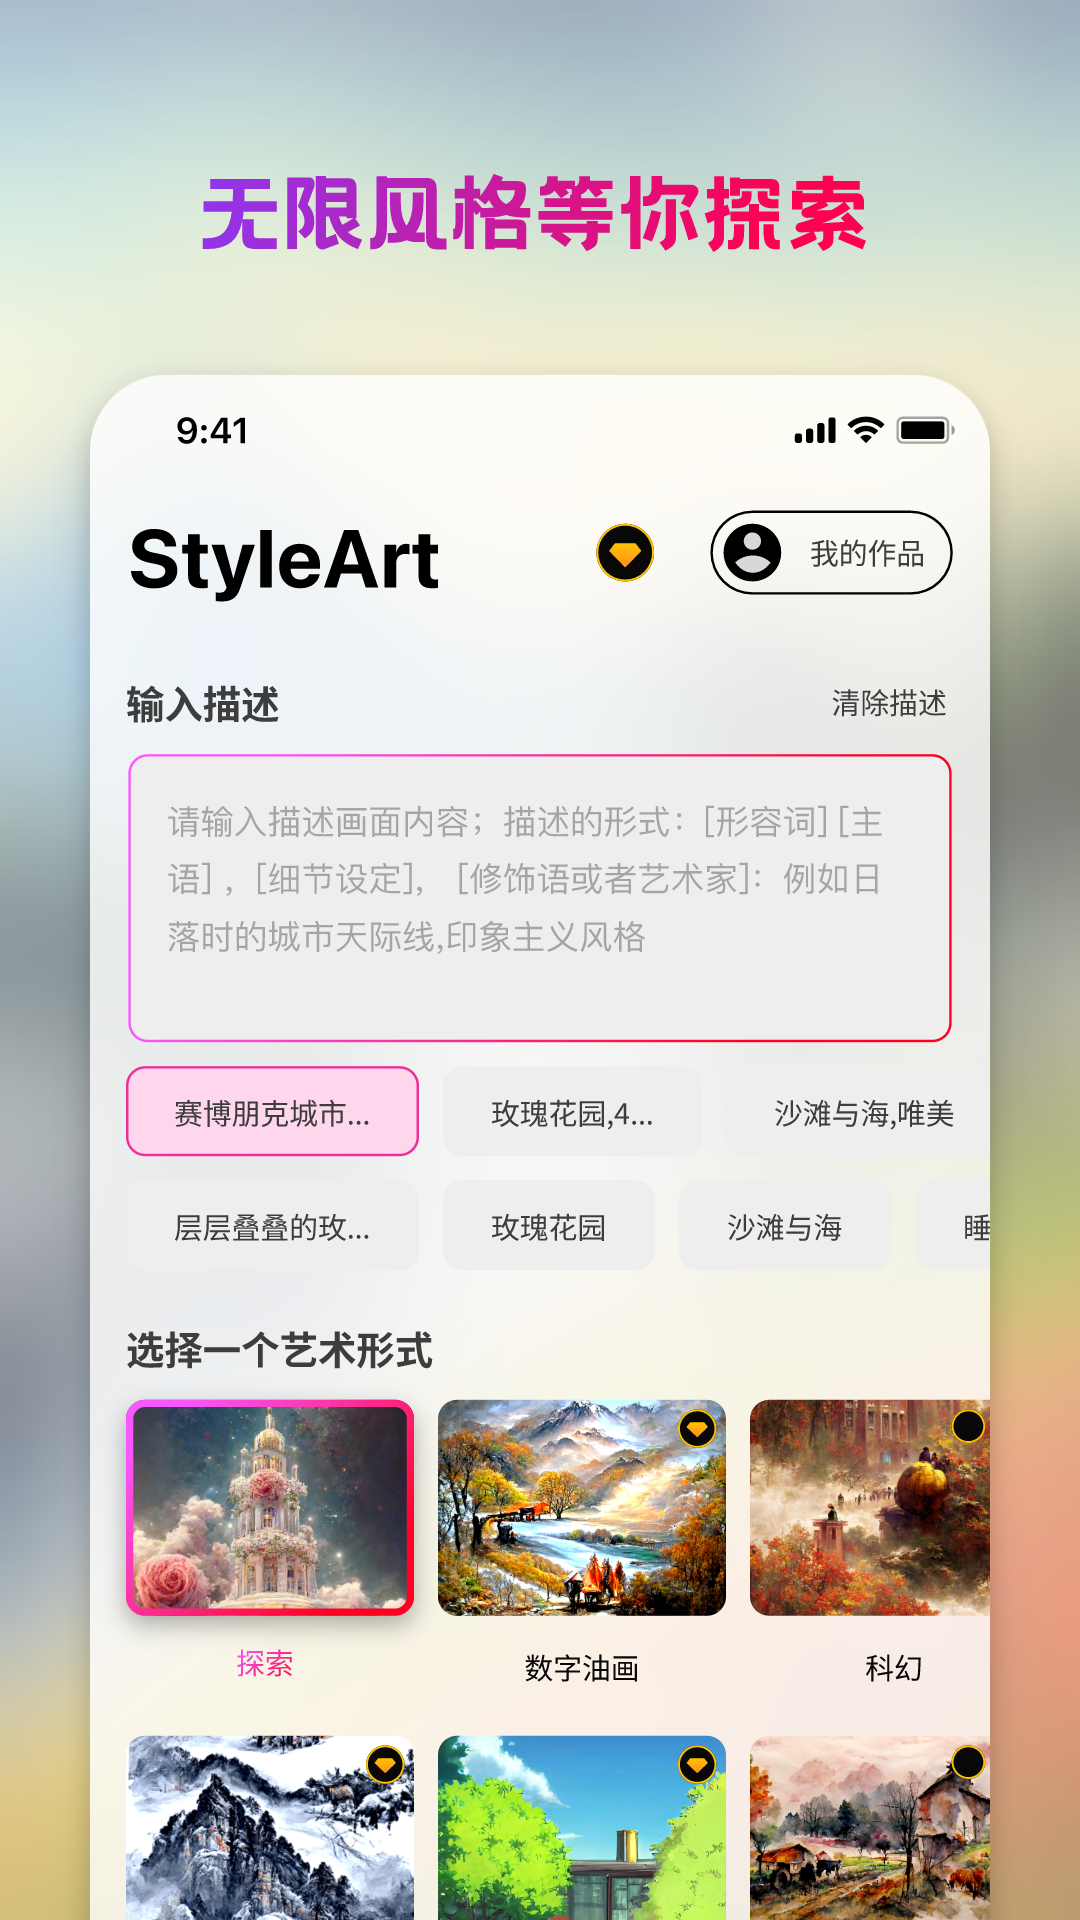 styleart最新版本